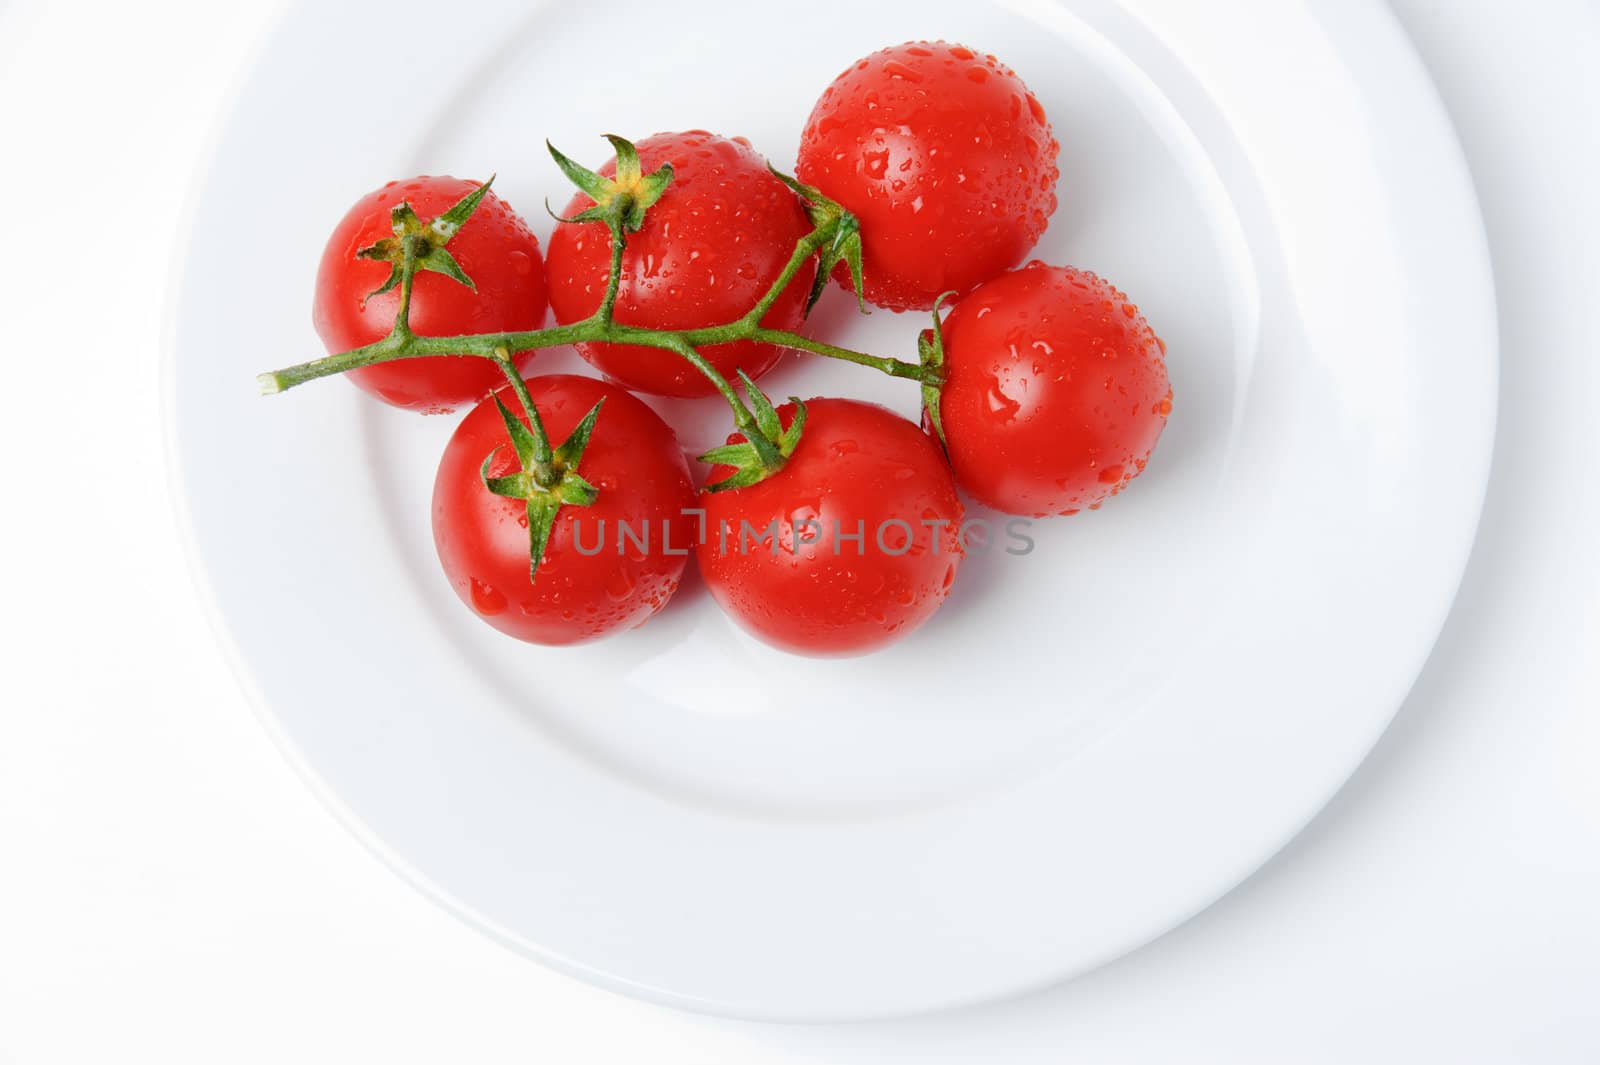 An image of fresh red tomatoes on a plate